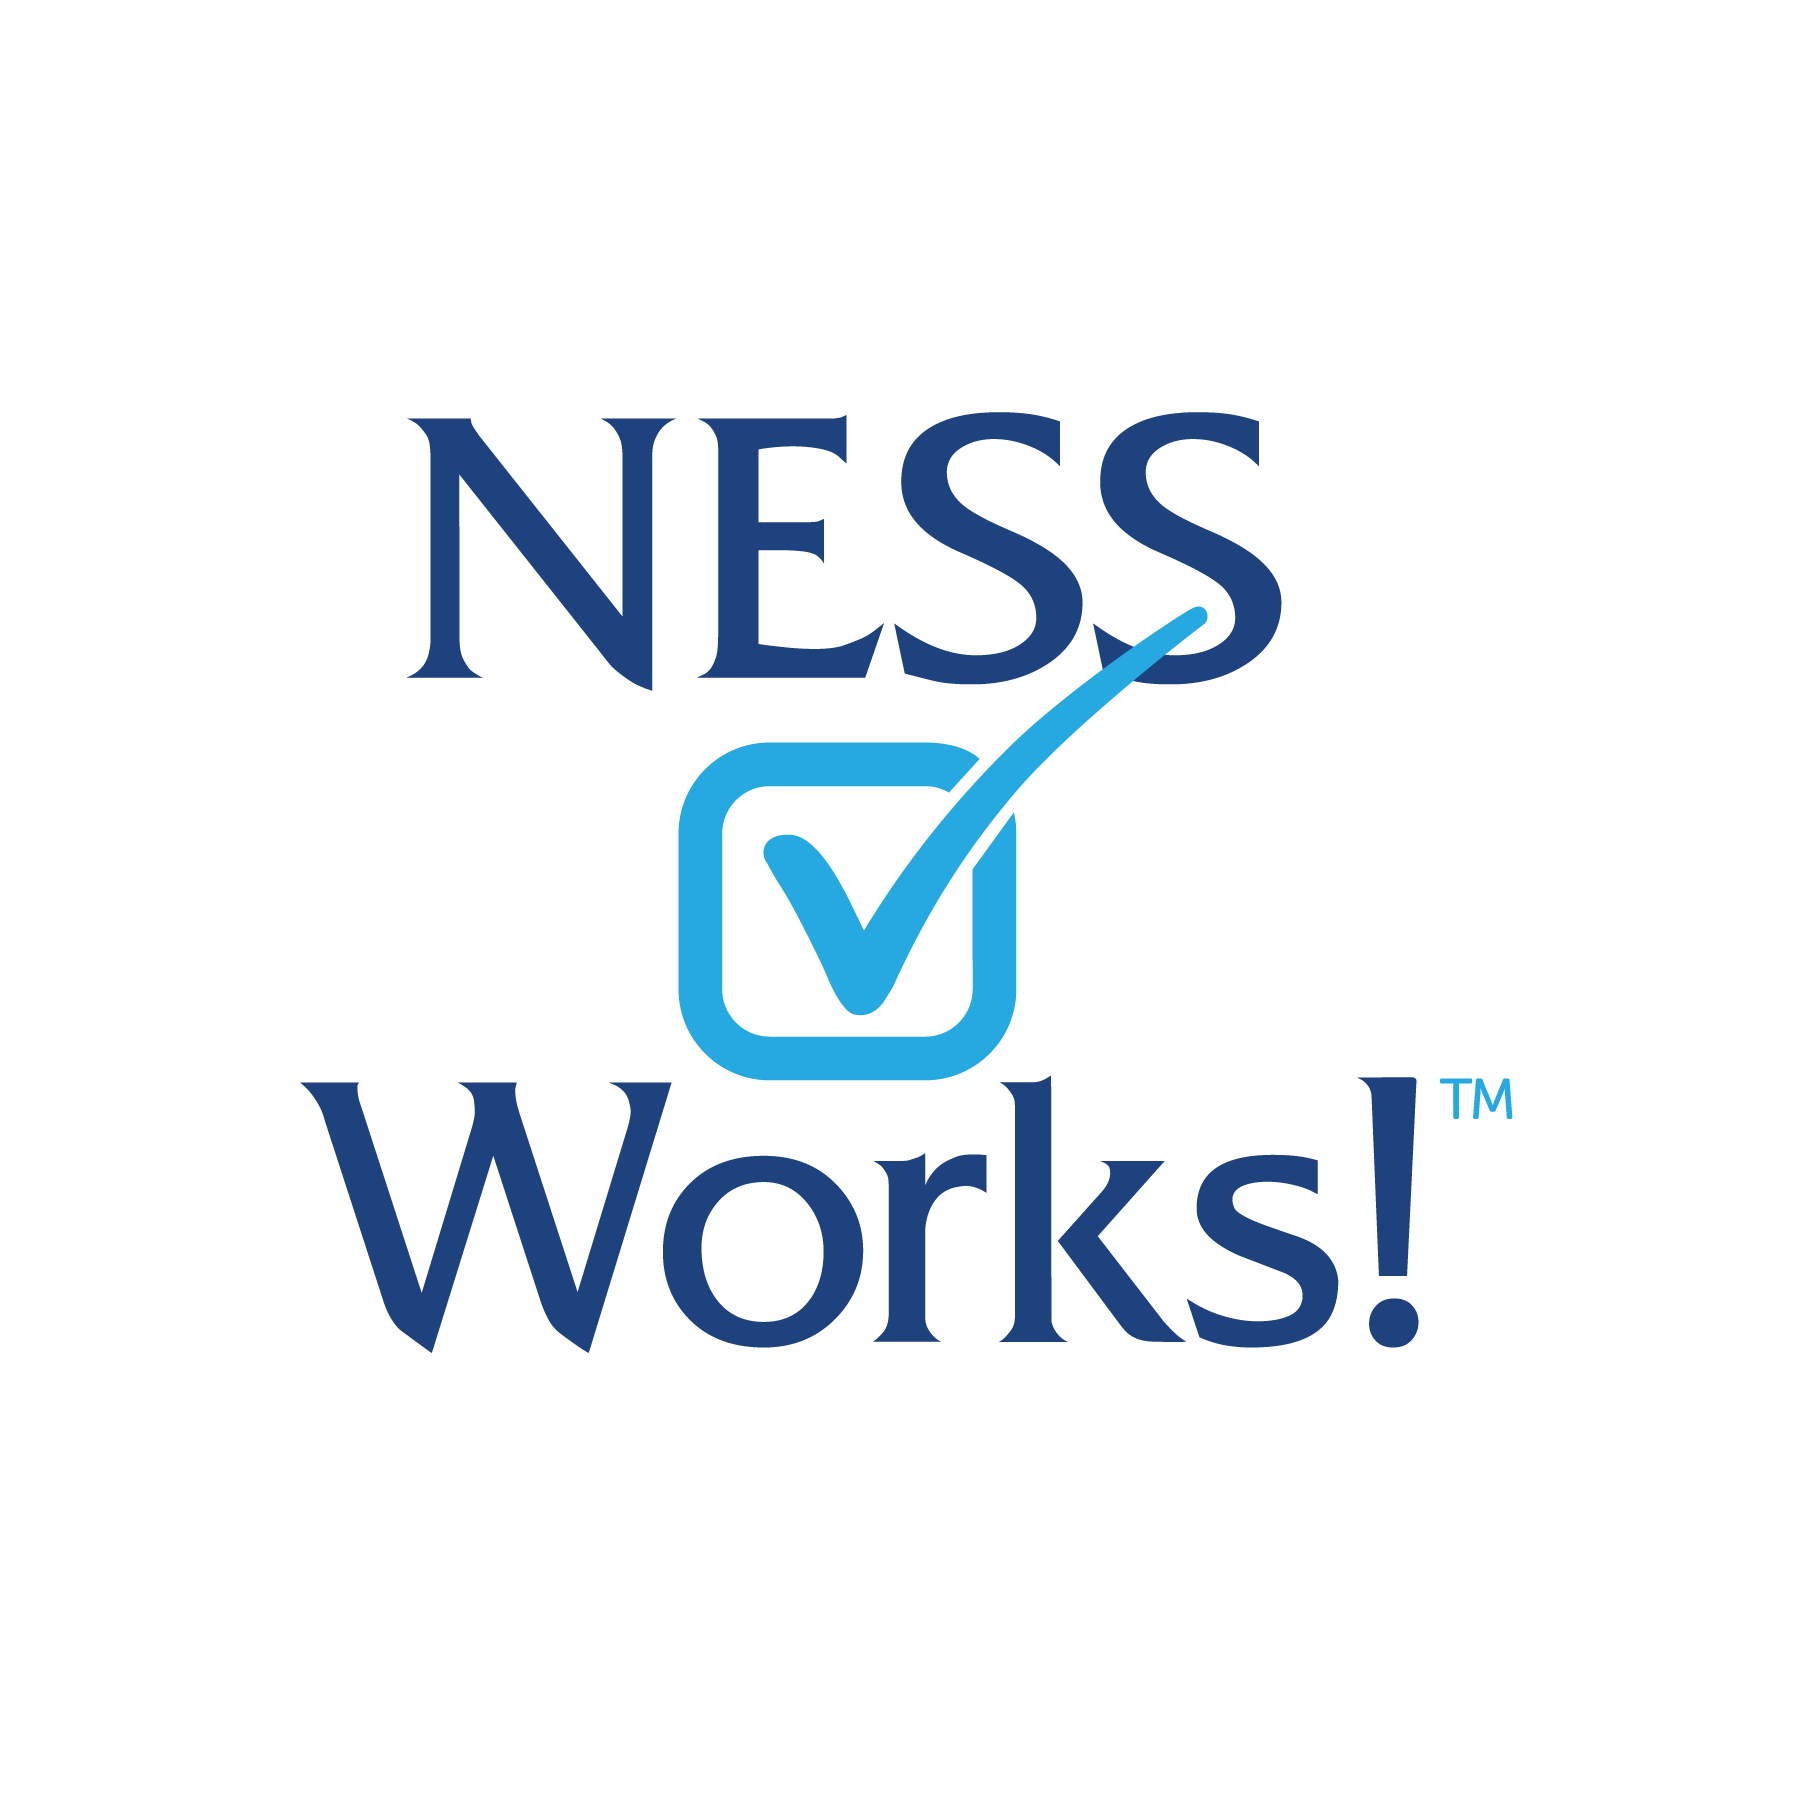 NESS Works Logo with a checkmark